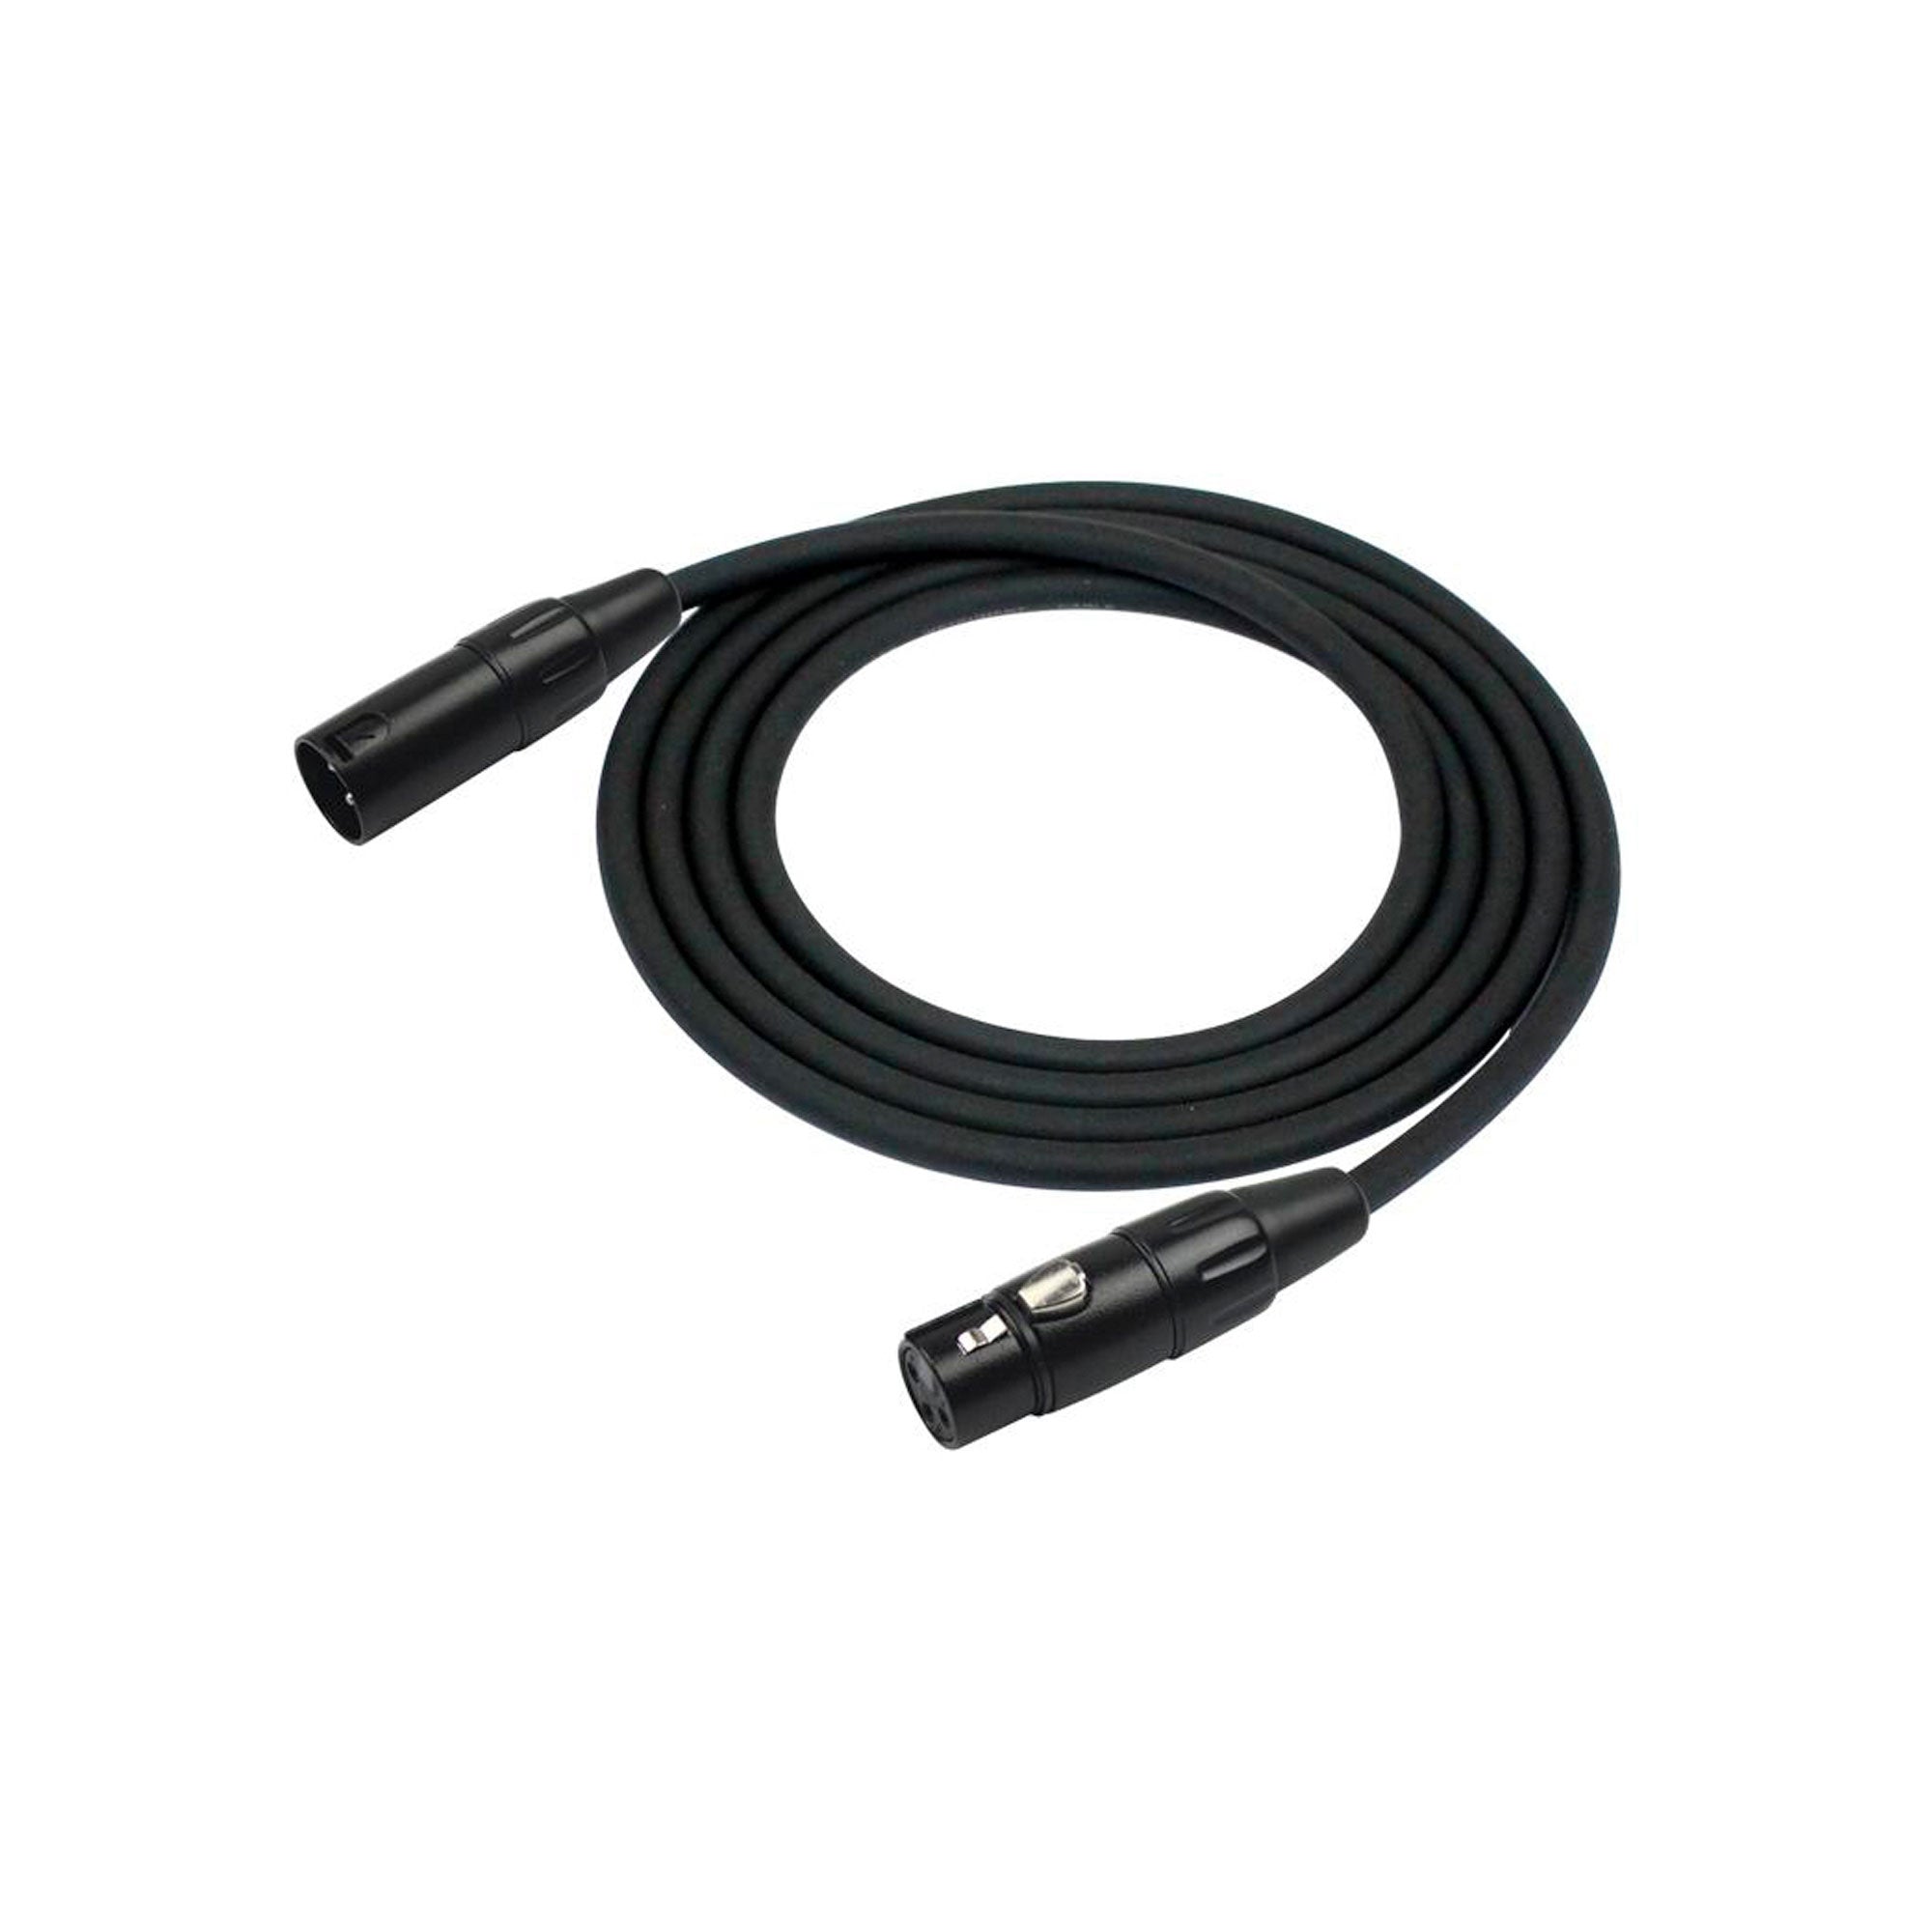 Kirlin Microphone Cable 25M 20AWG XLR M-F Black